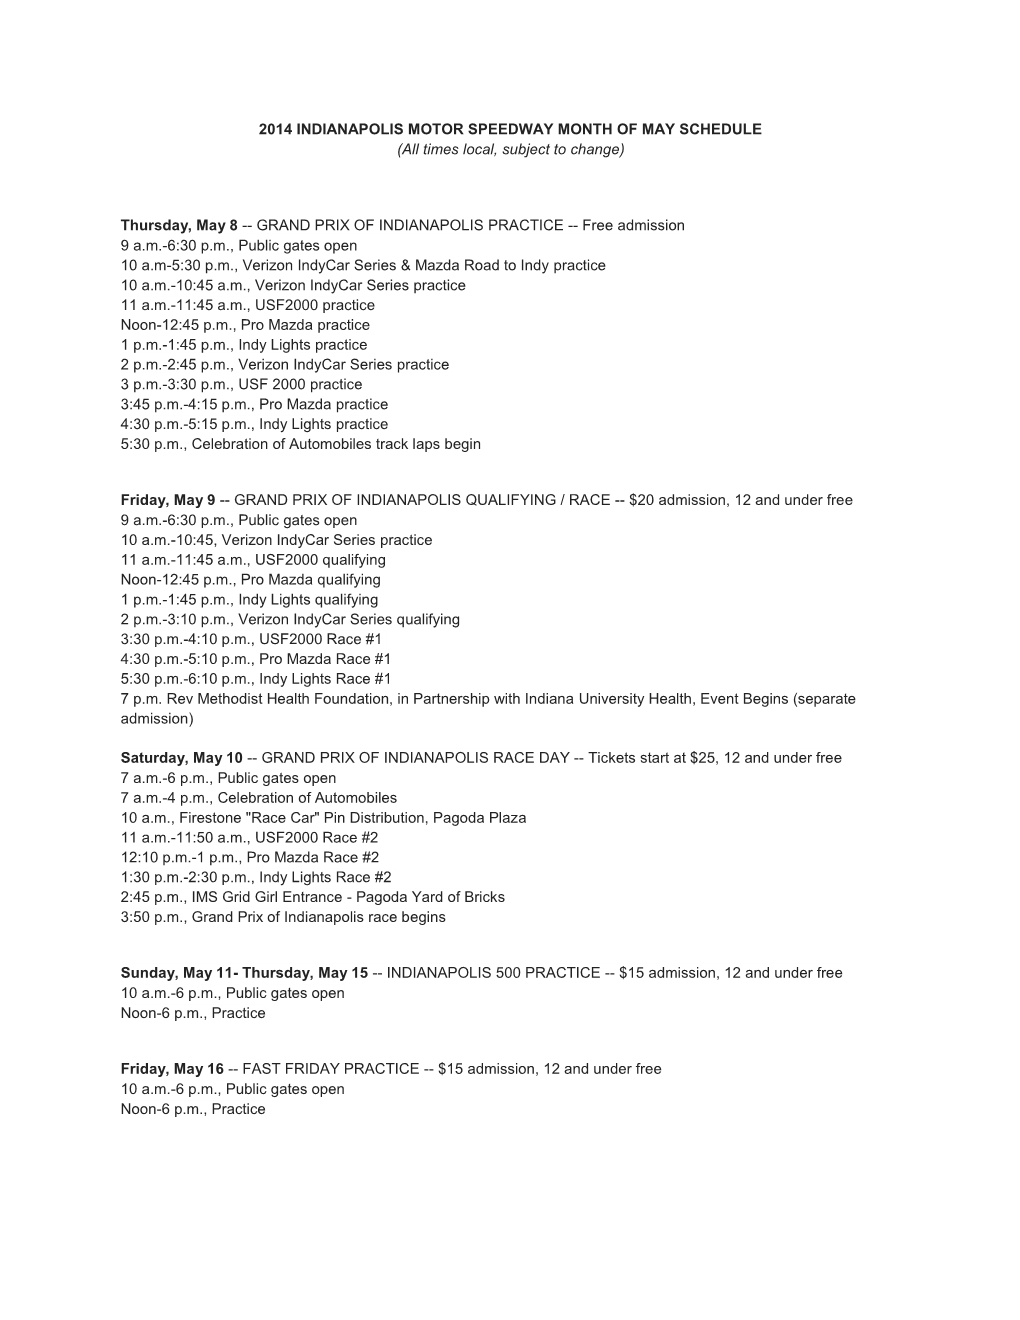 2014 INDIANAPOLIS MOTOR SPEEDWAY MONTH of MAY SCHEDULE (All Times Local, Subject to Change)